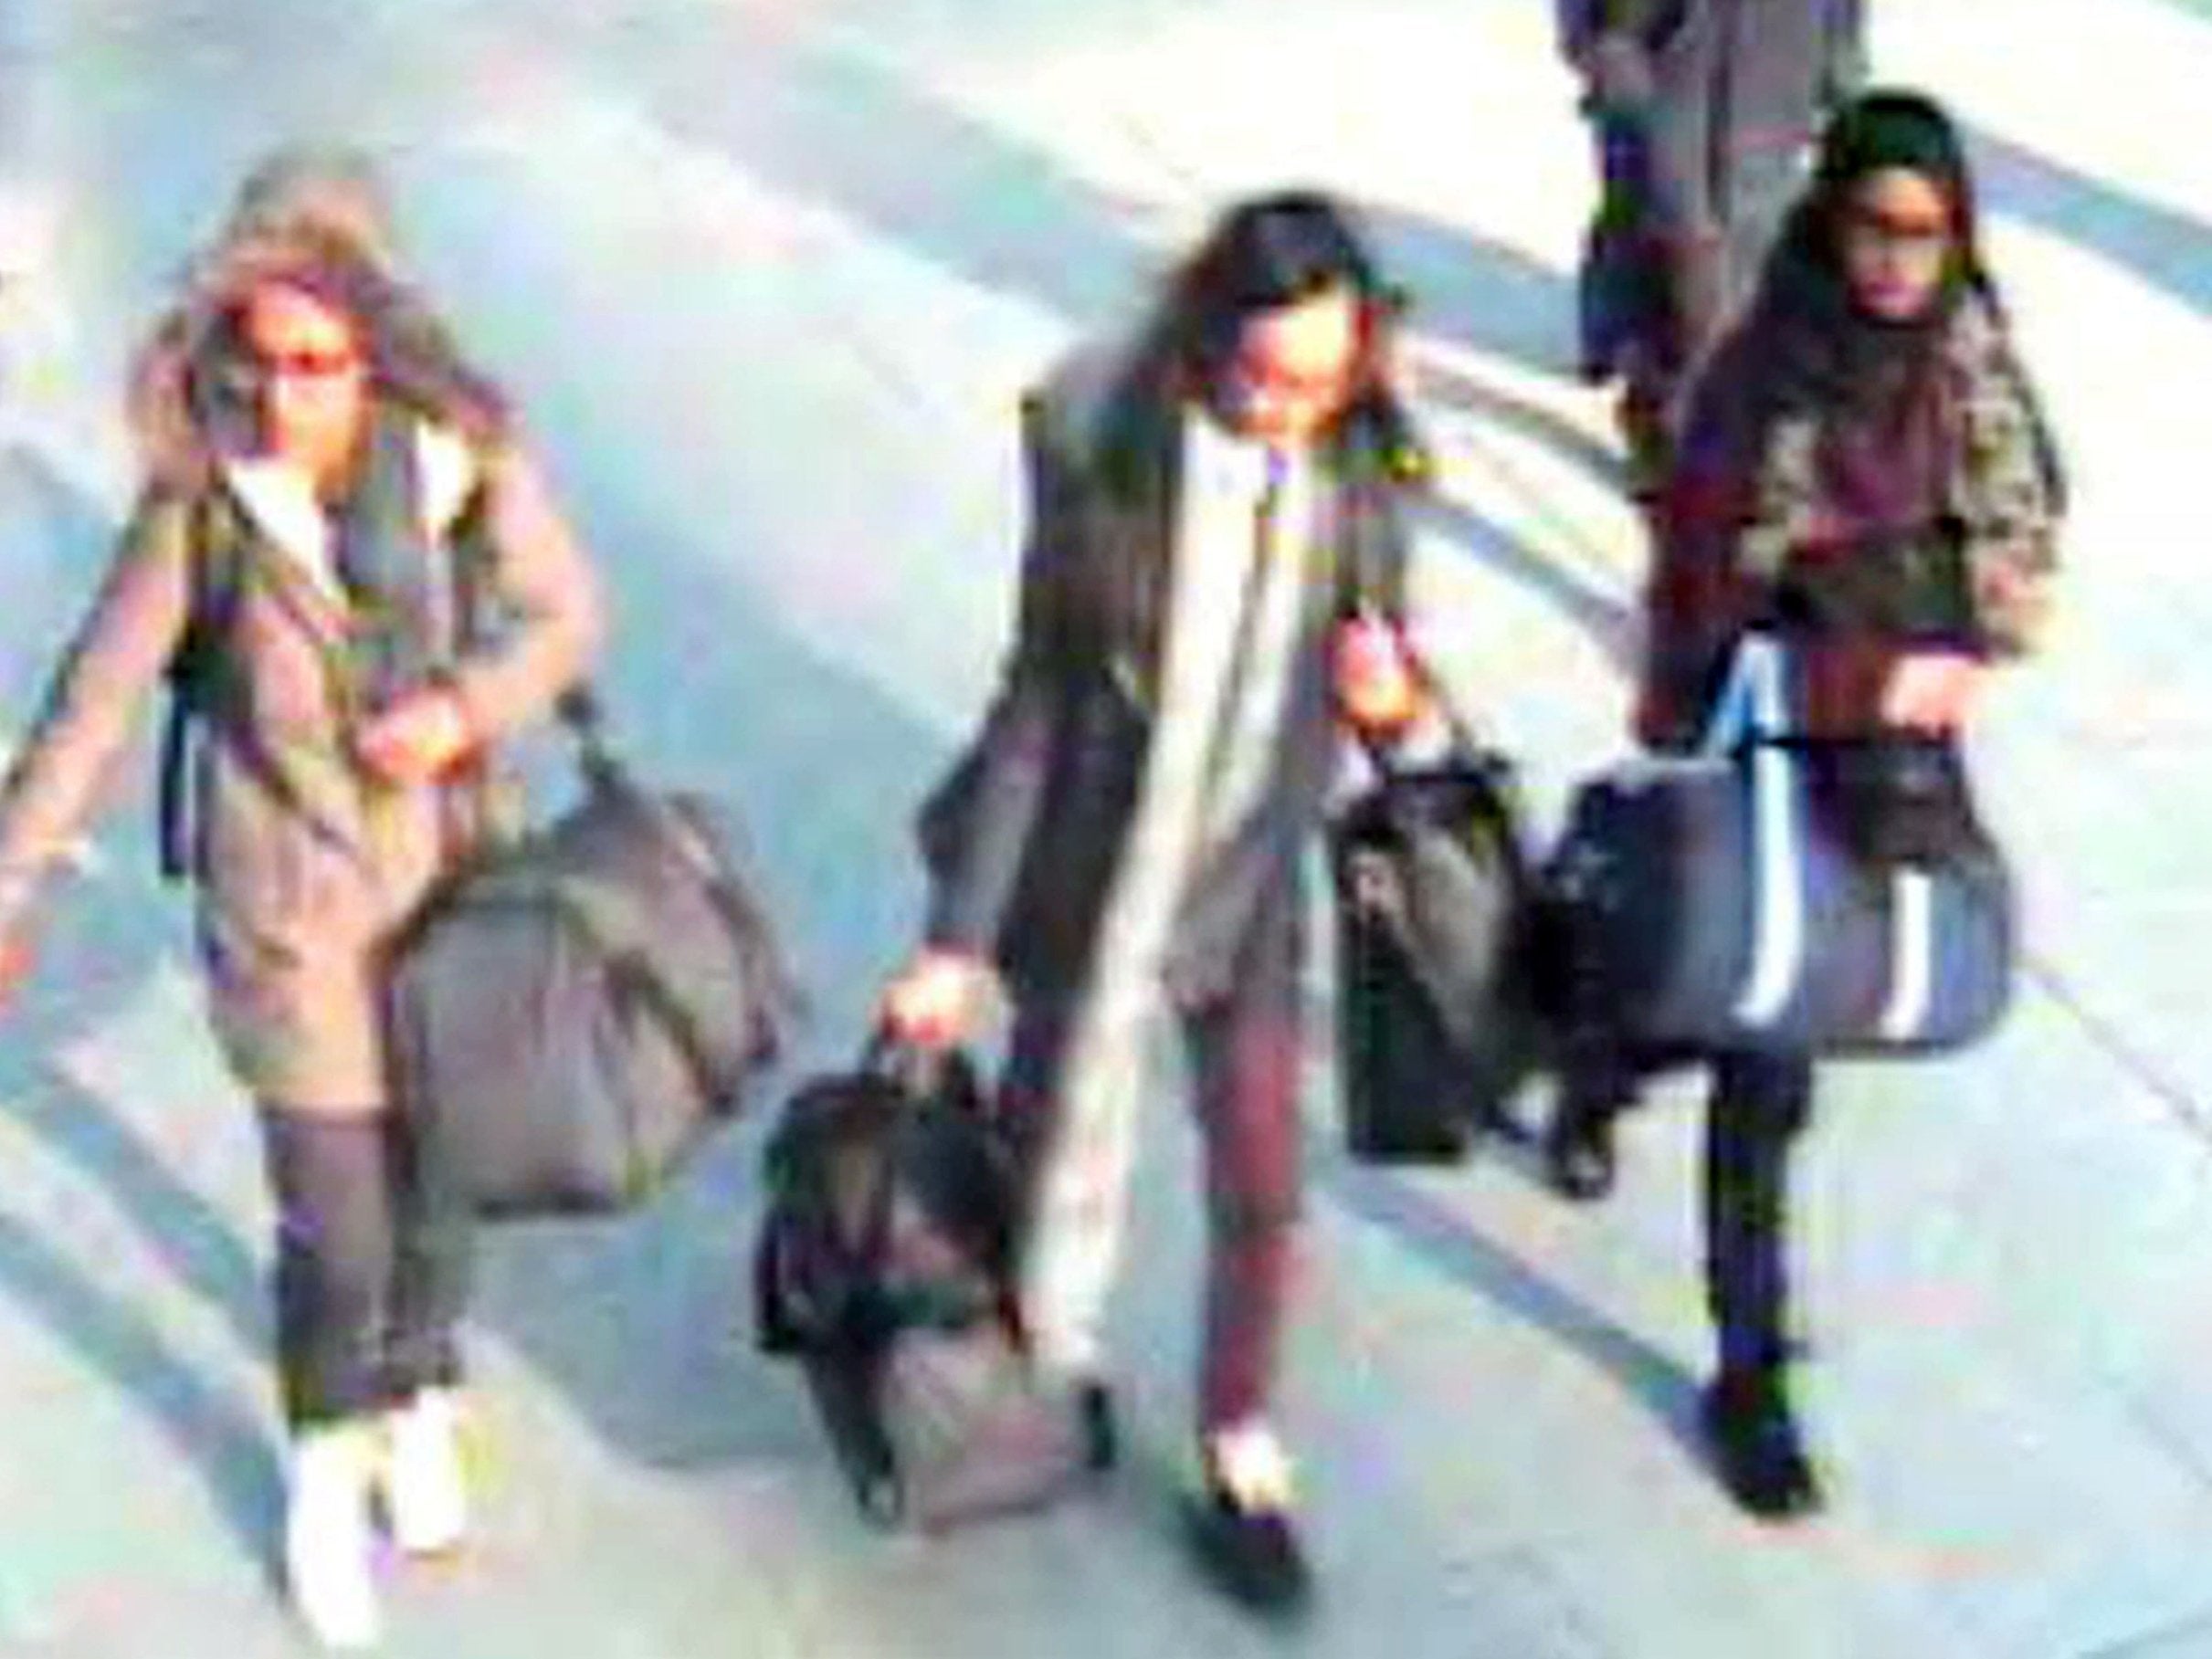 The Bethnal Green girls leaving the UK in 2015